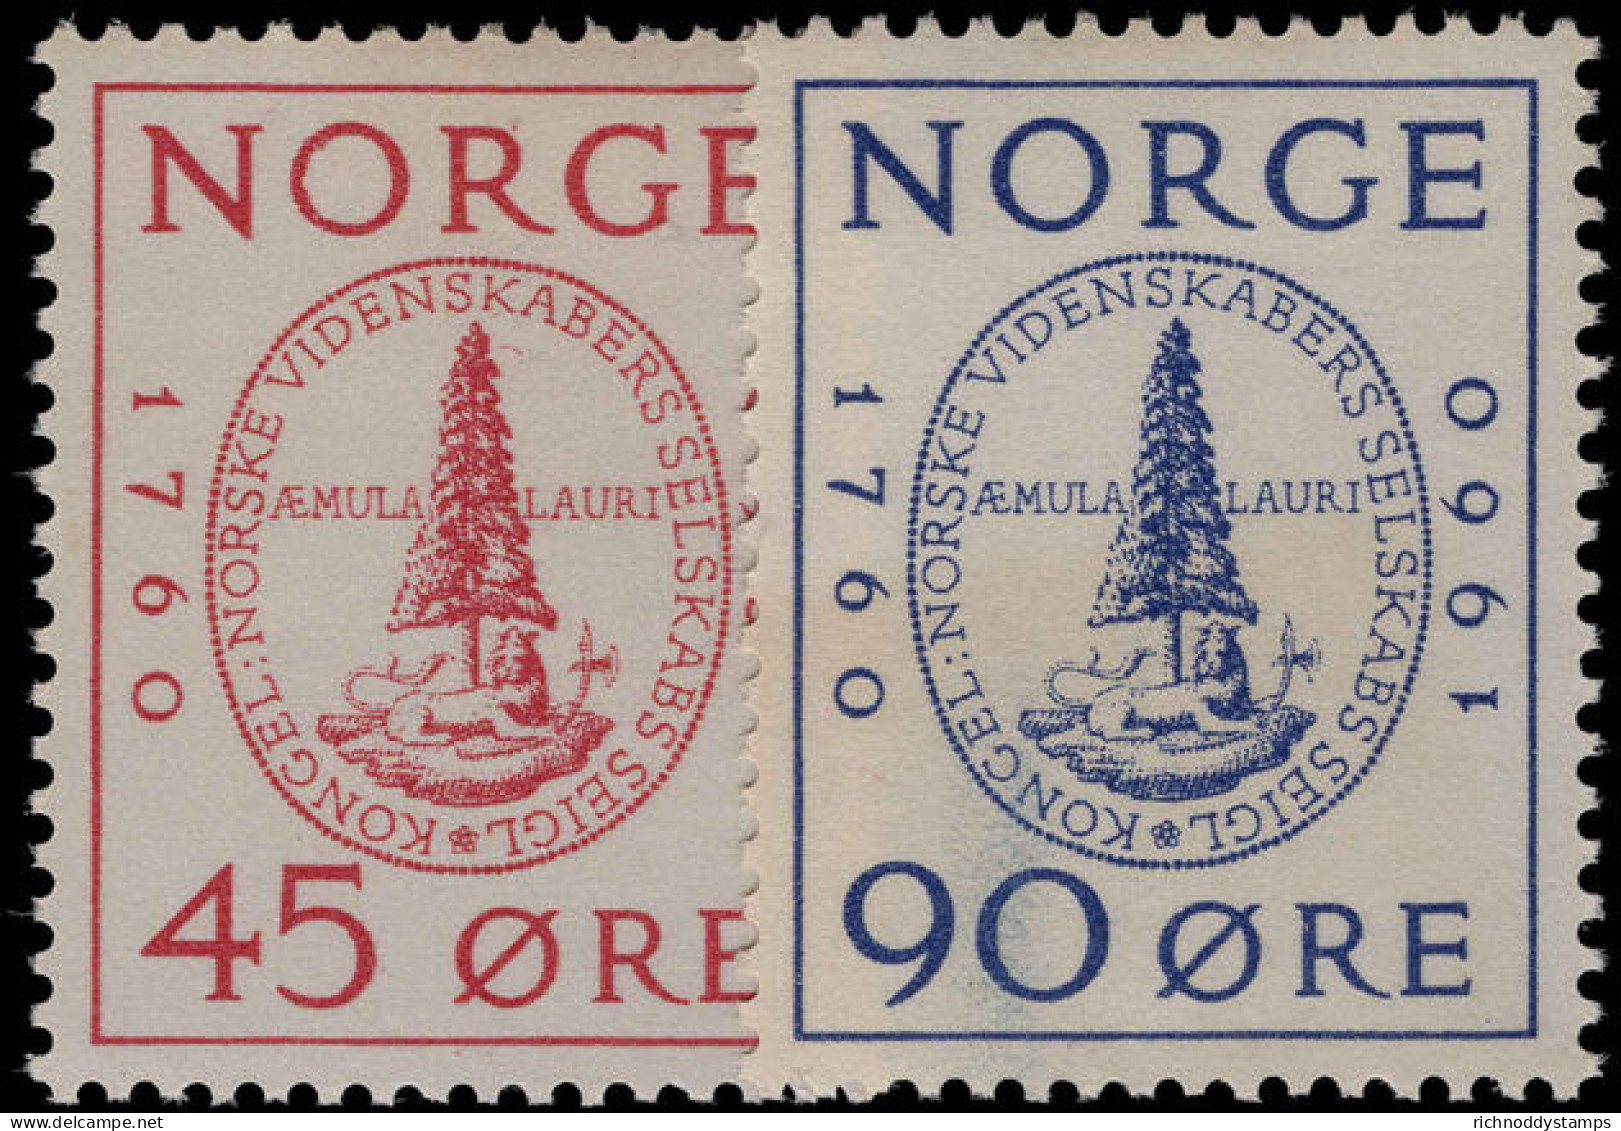 Norway 1960 Society Of Sciences Unmounted Mint. - Neufs